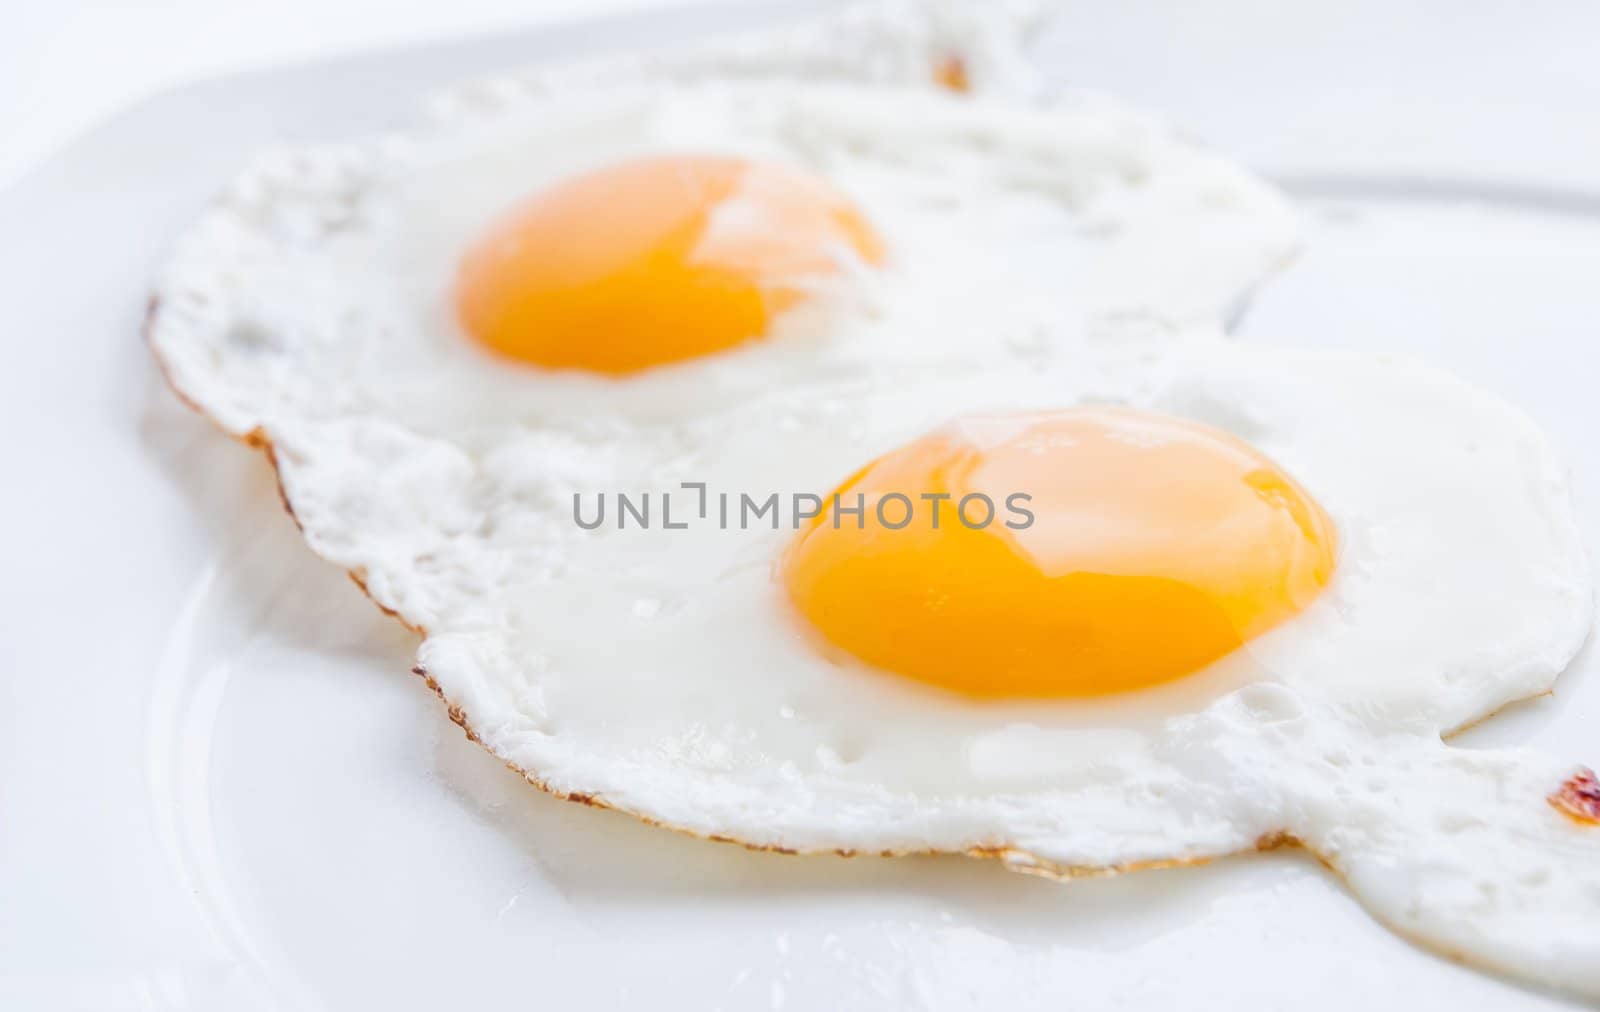 Clouse up double fried egg on the white plate